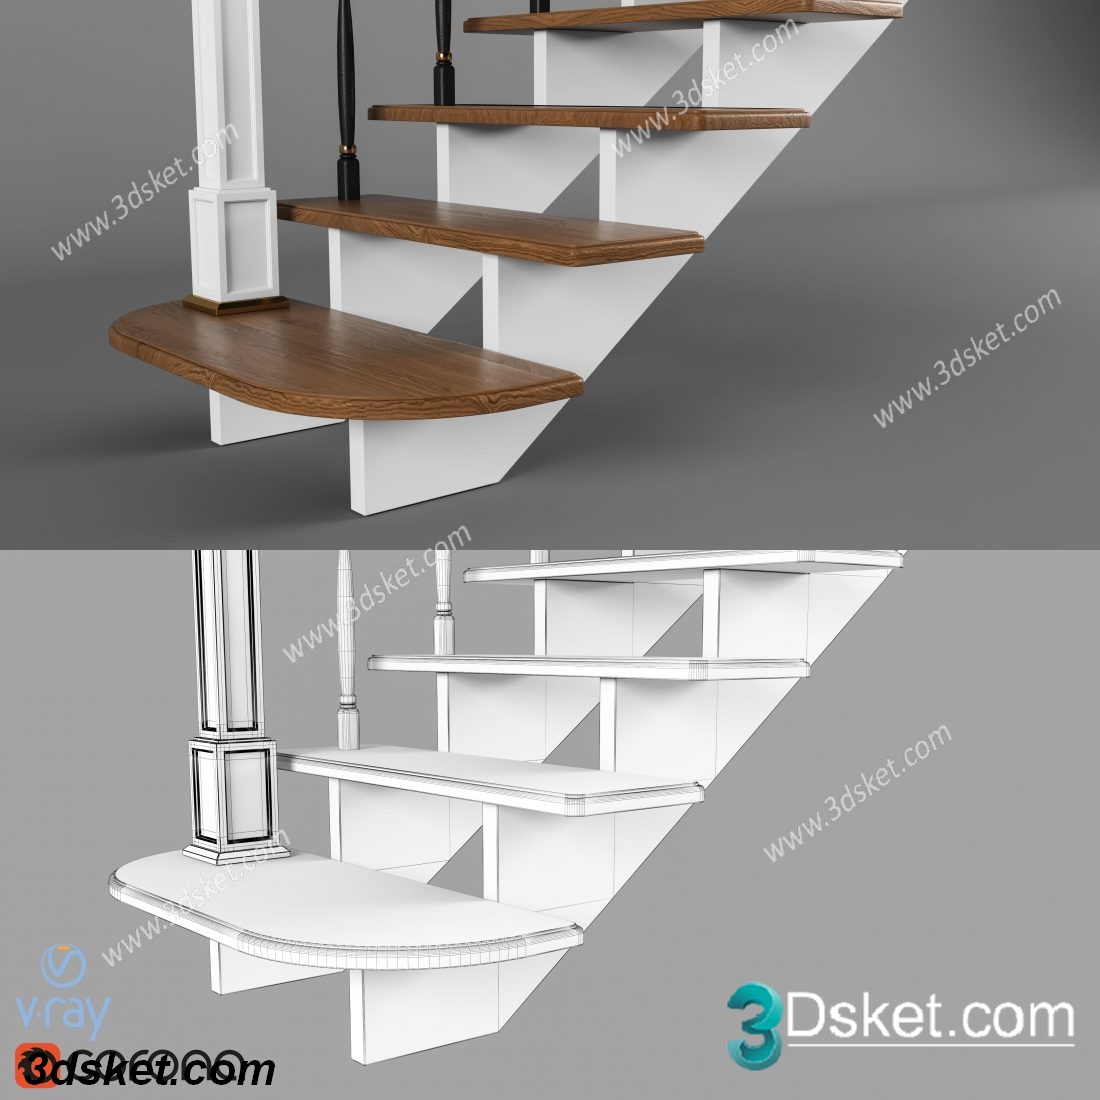 3D Model Staircase Free Download 0029